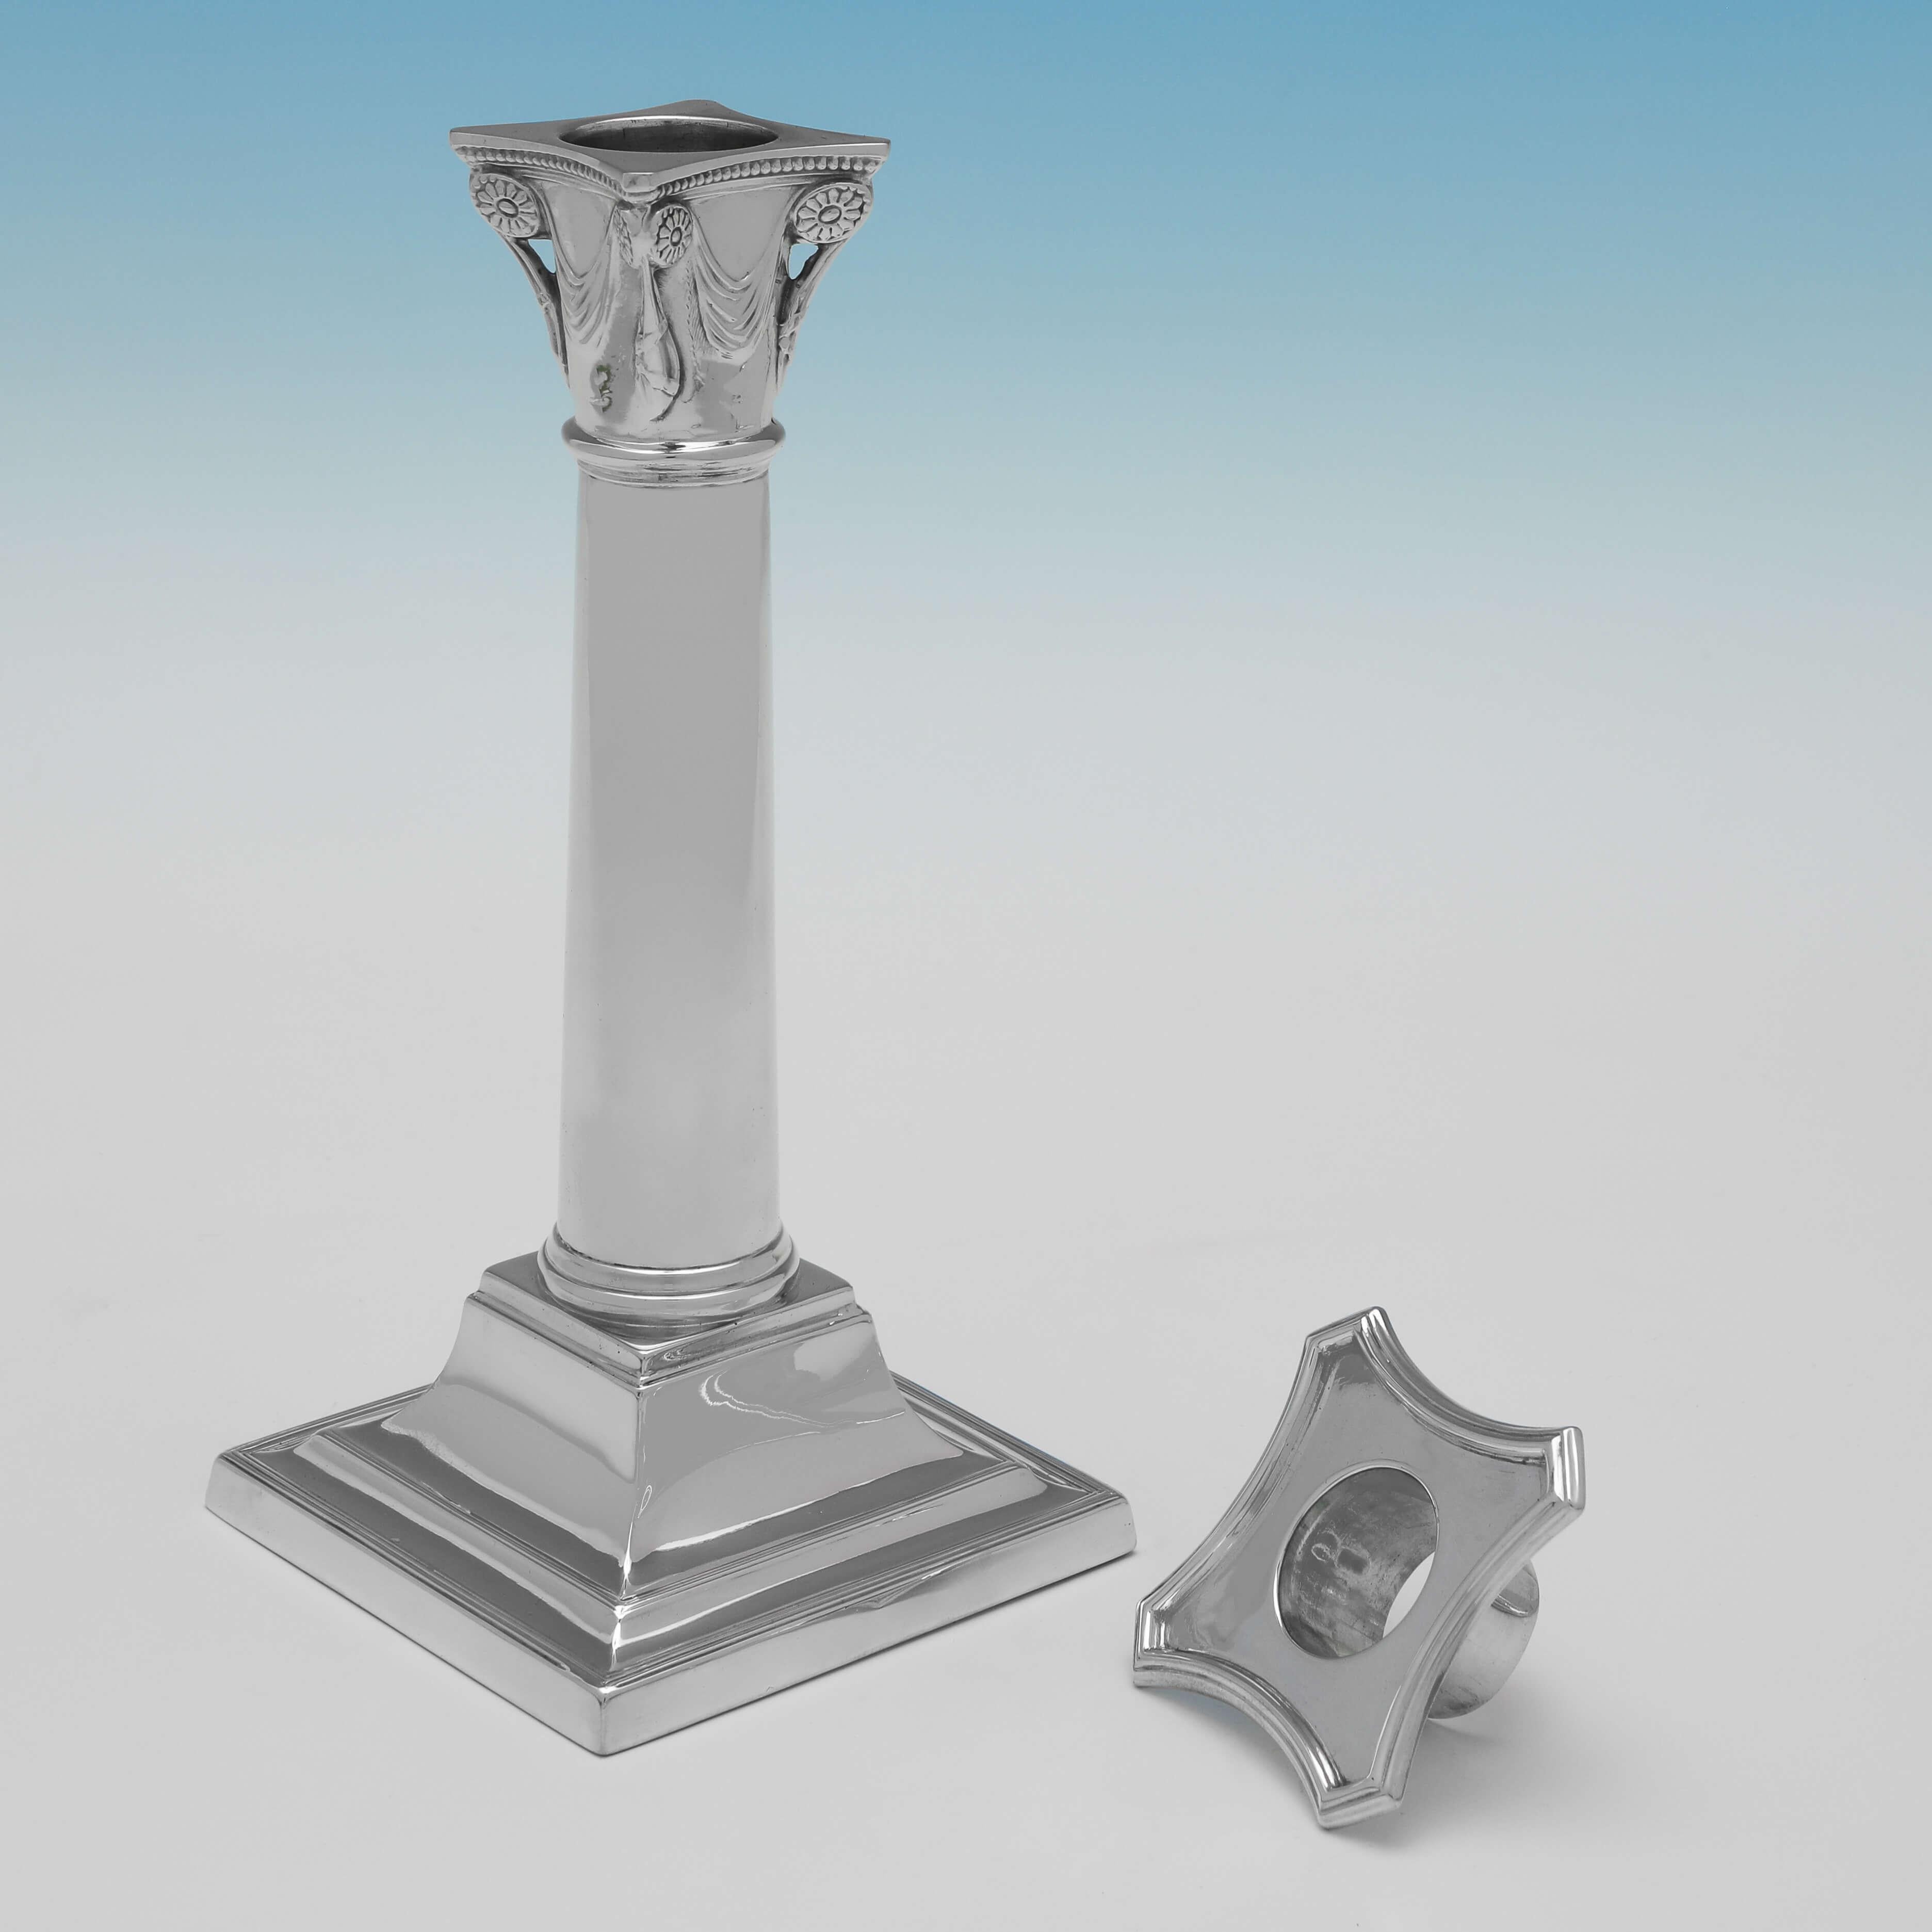 English Neoclassical Revival Sterling Silver Pair of Candlesticks, Sheffield 1921 For Sale